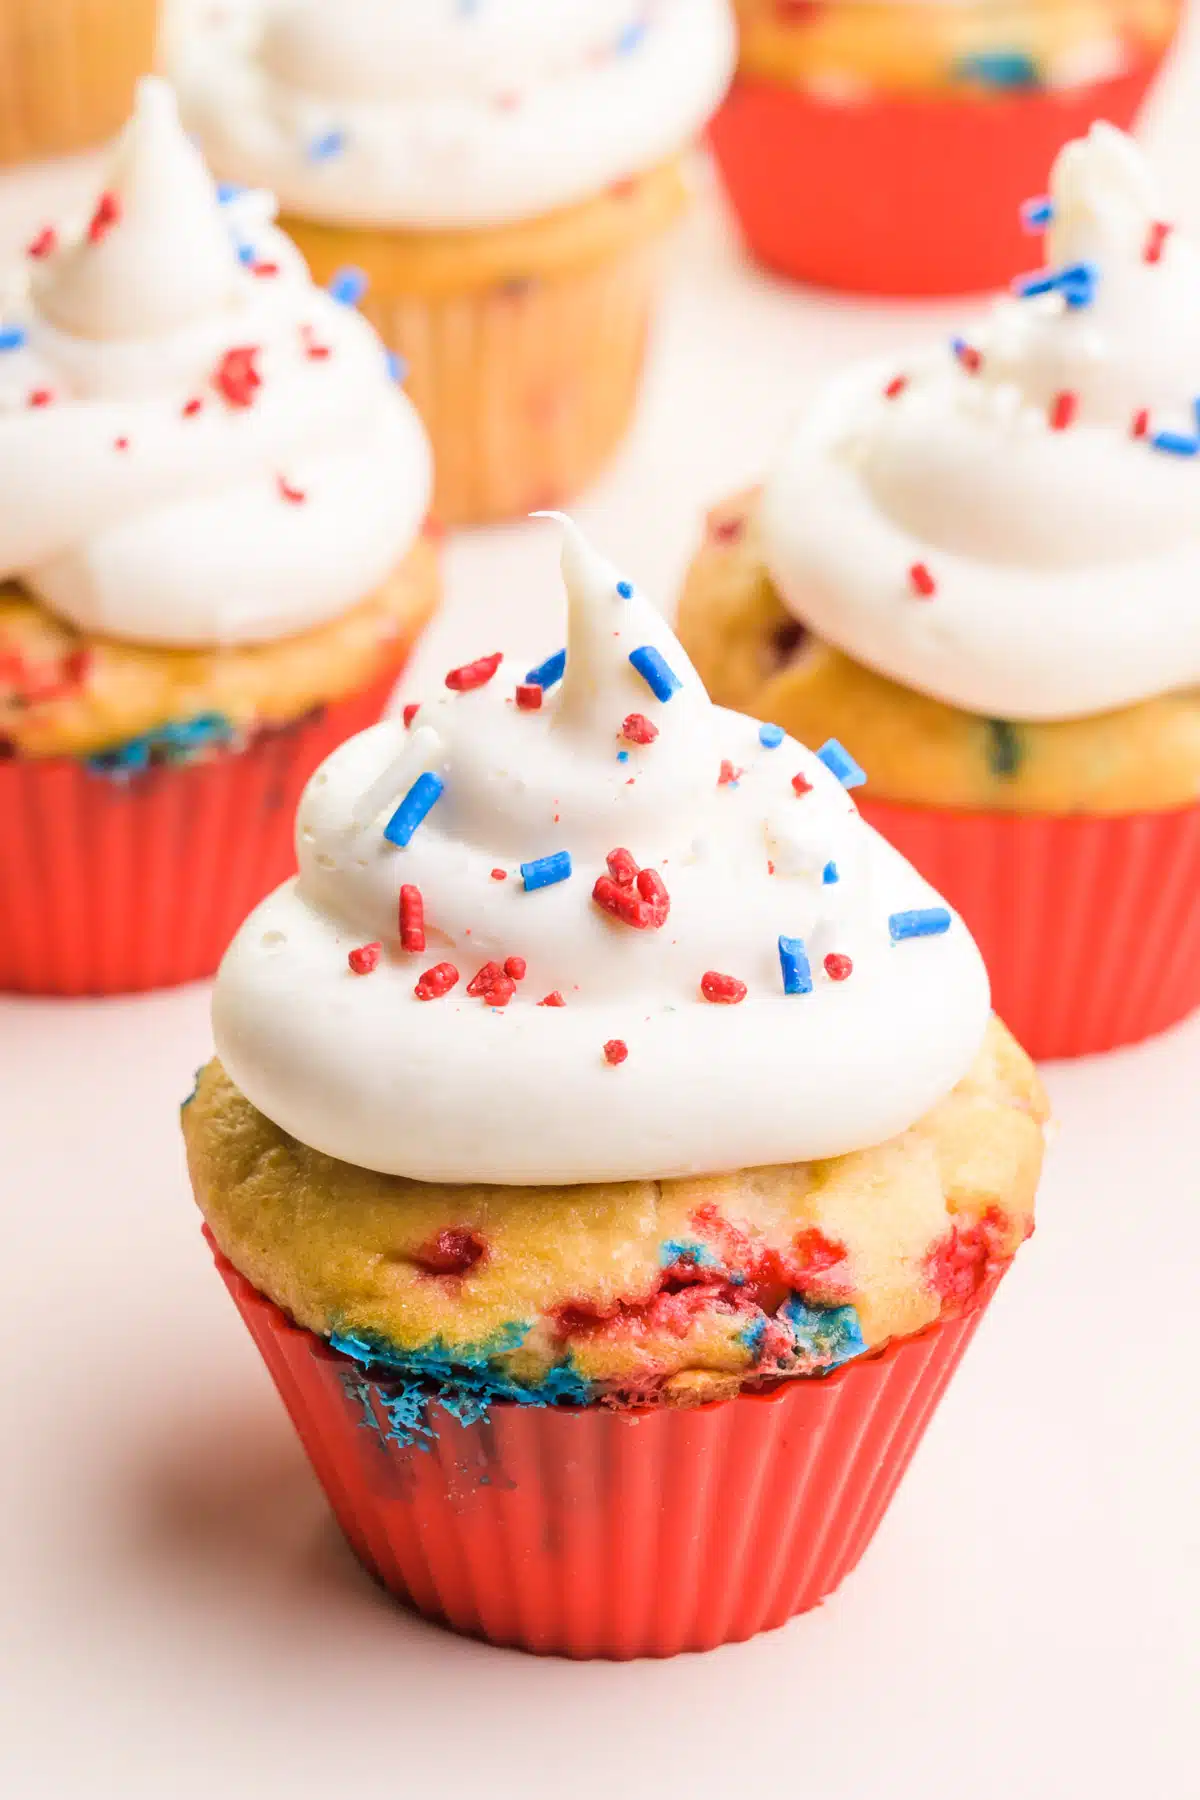 Patriotic cupcakes are in red silicone cupcake liners. They're topped with white frosting and red, white, and blue sprinkles.